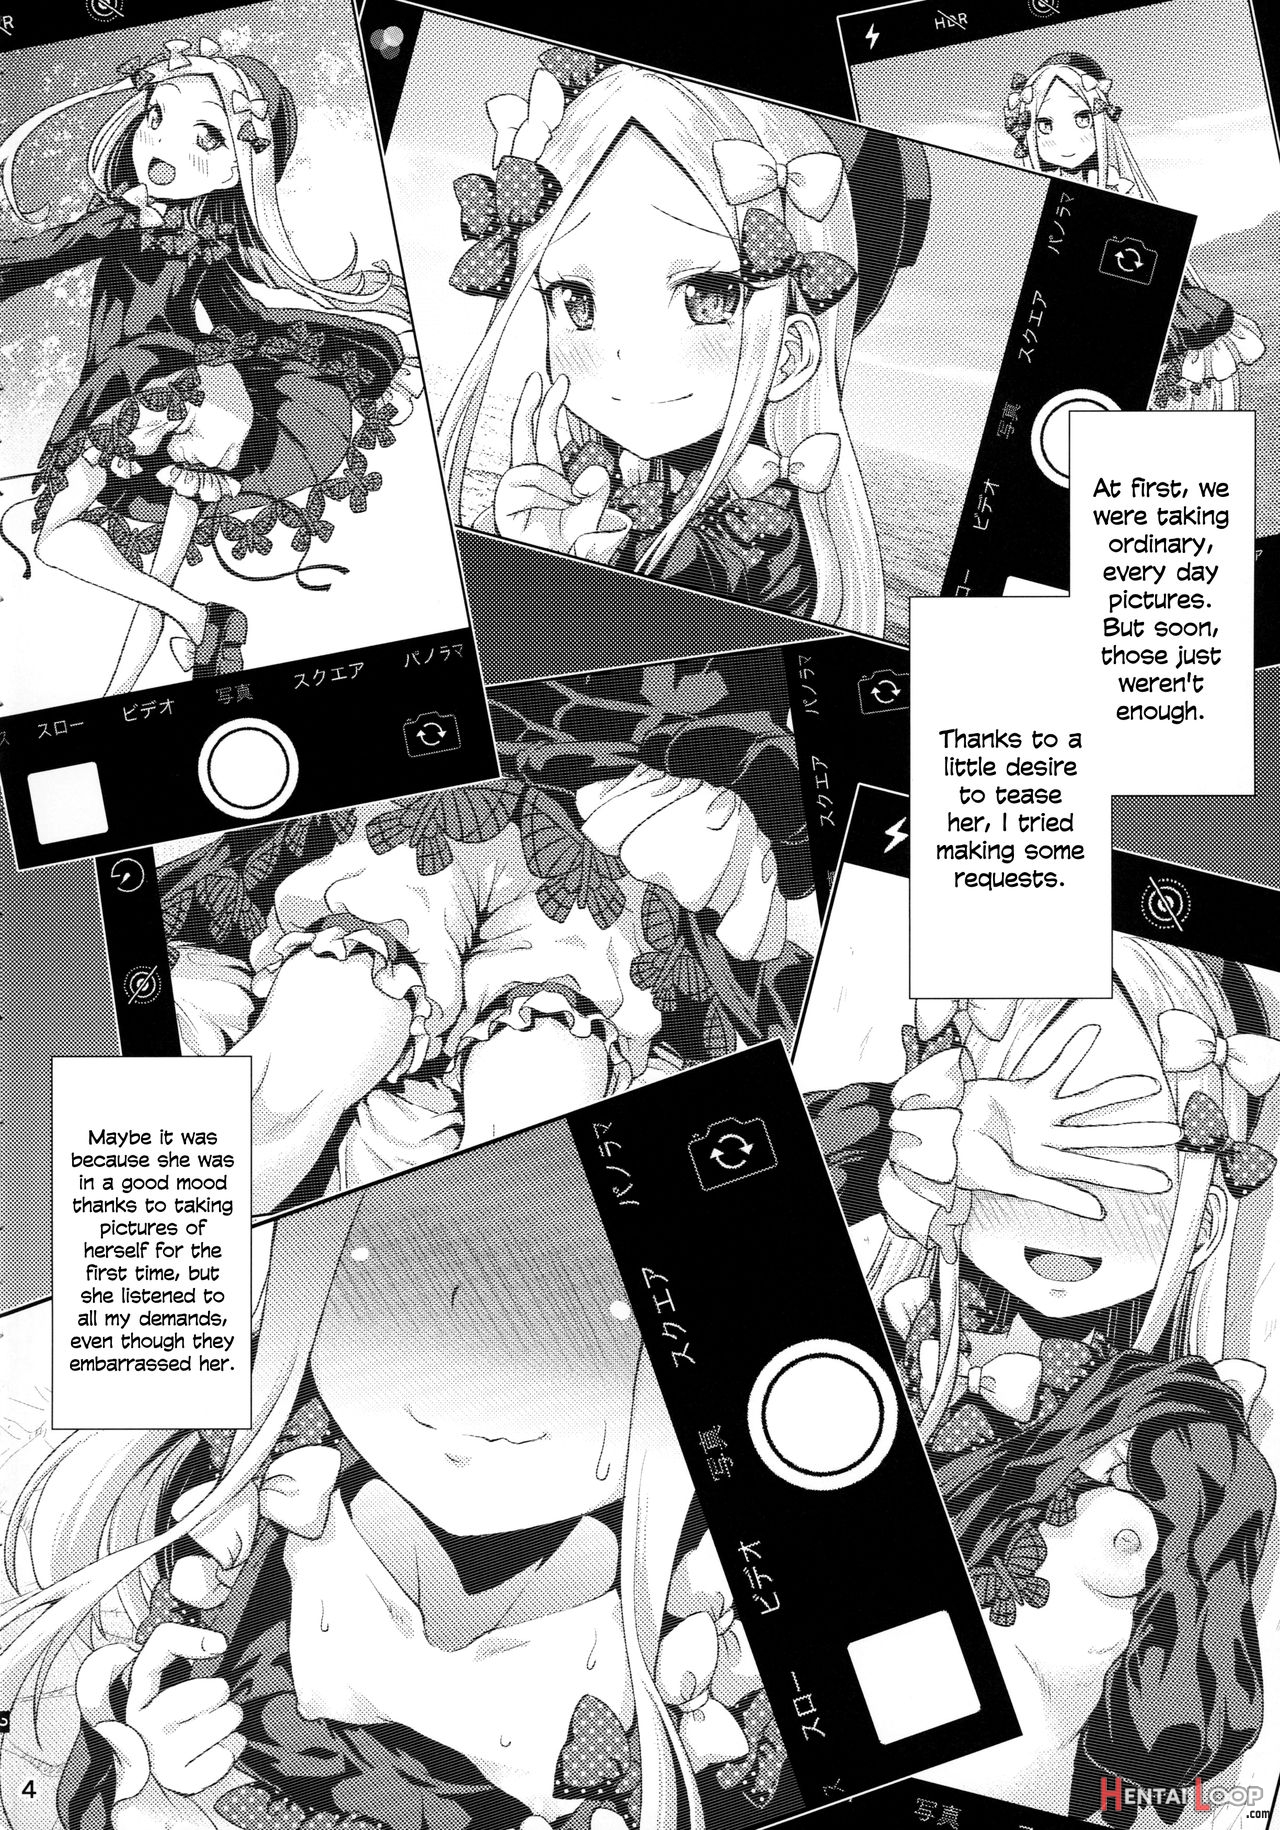 Page 1 of Abby And The Secret Homemade Sex Tape (by Yamazaki Kana) pic